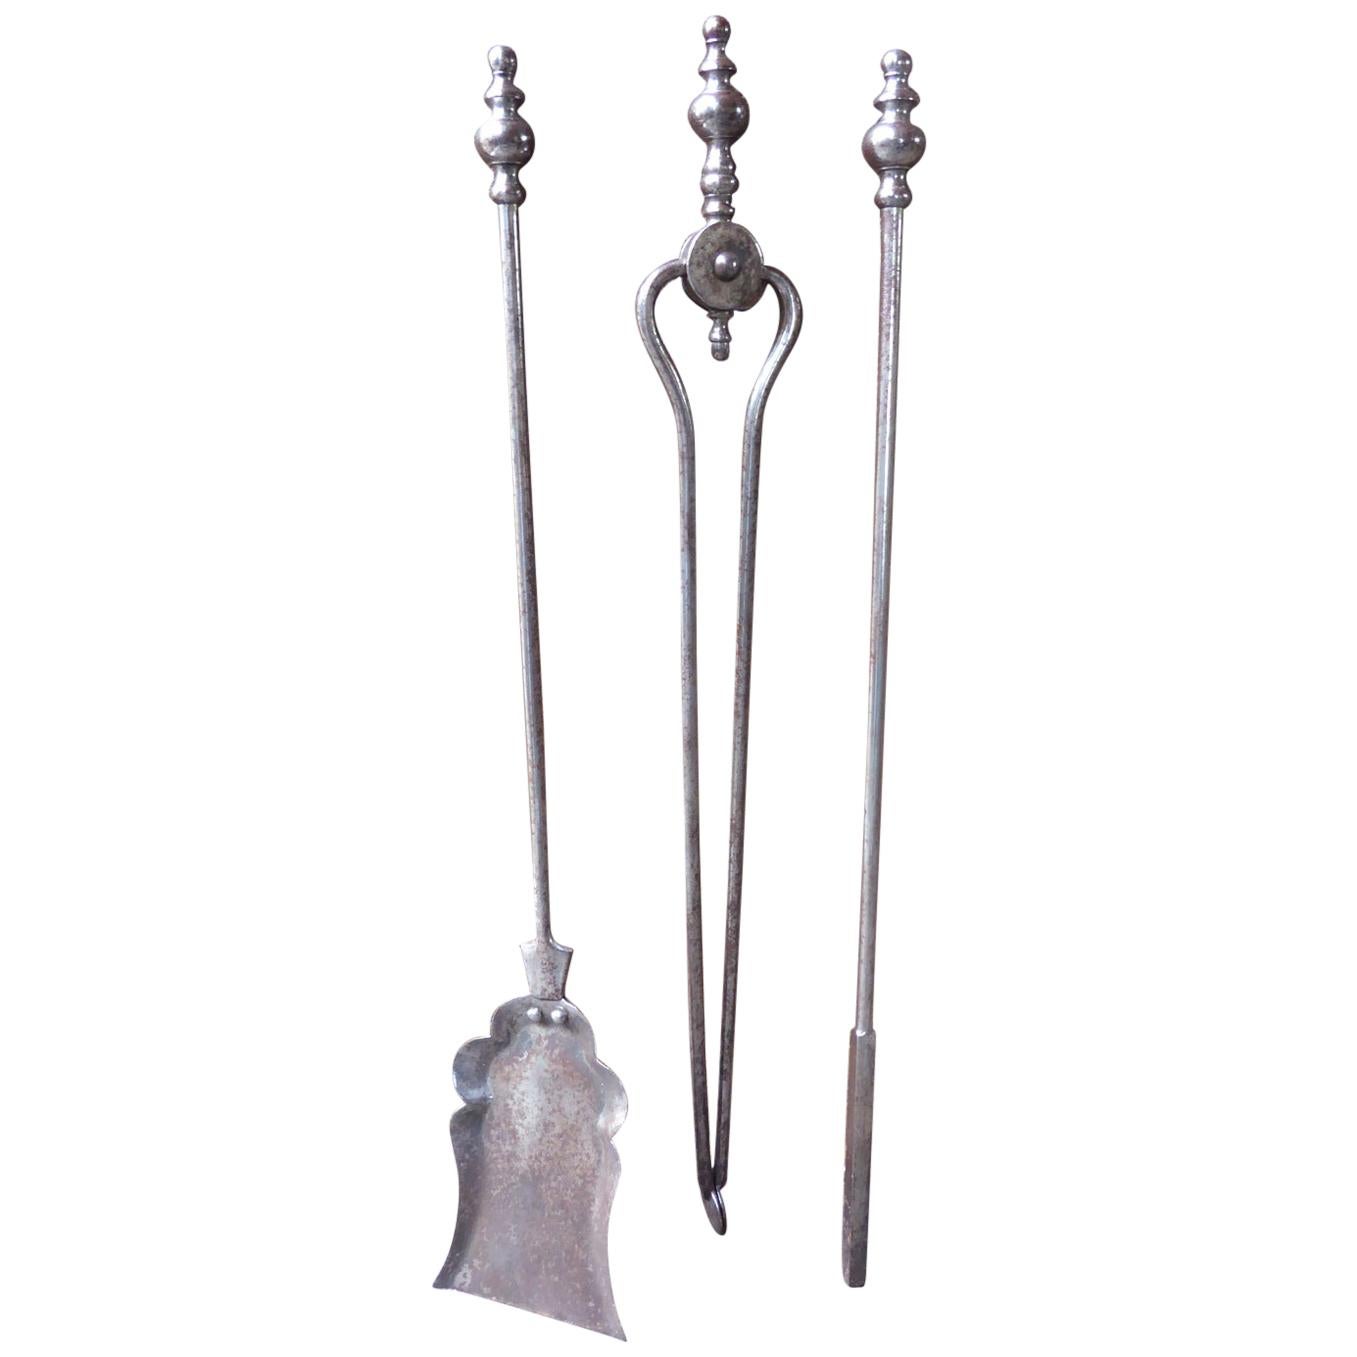 Victorian Fireplace Tools or Fire Irons, 19th Century, English